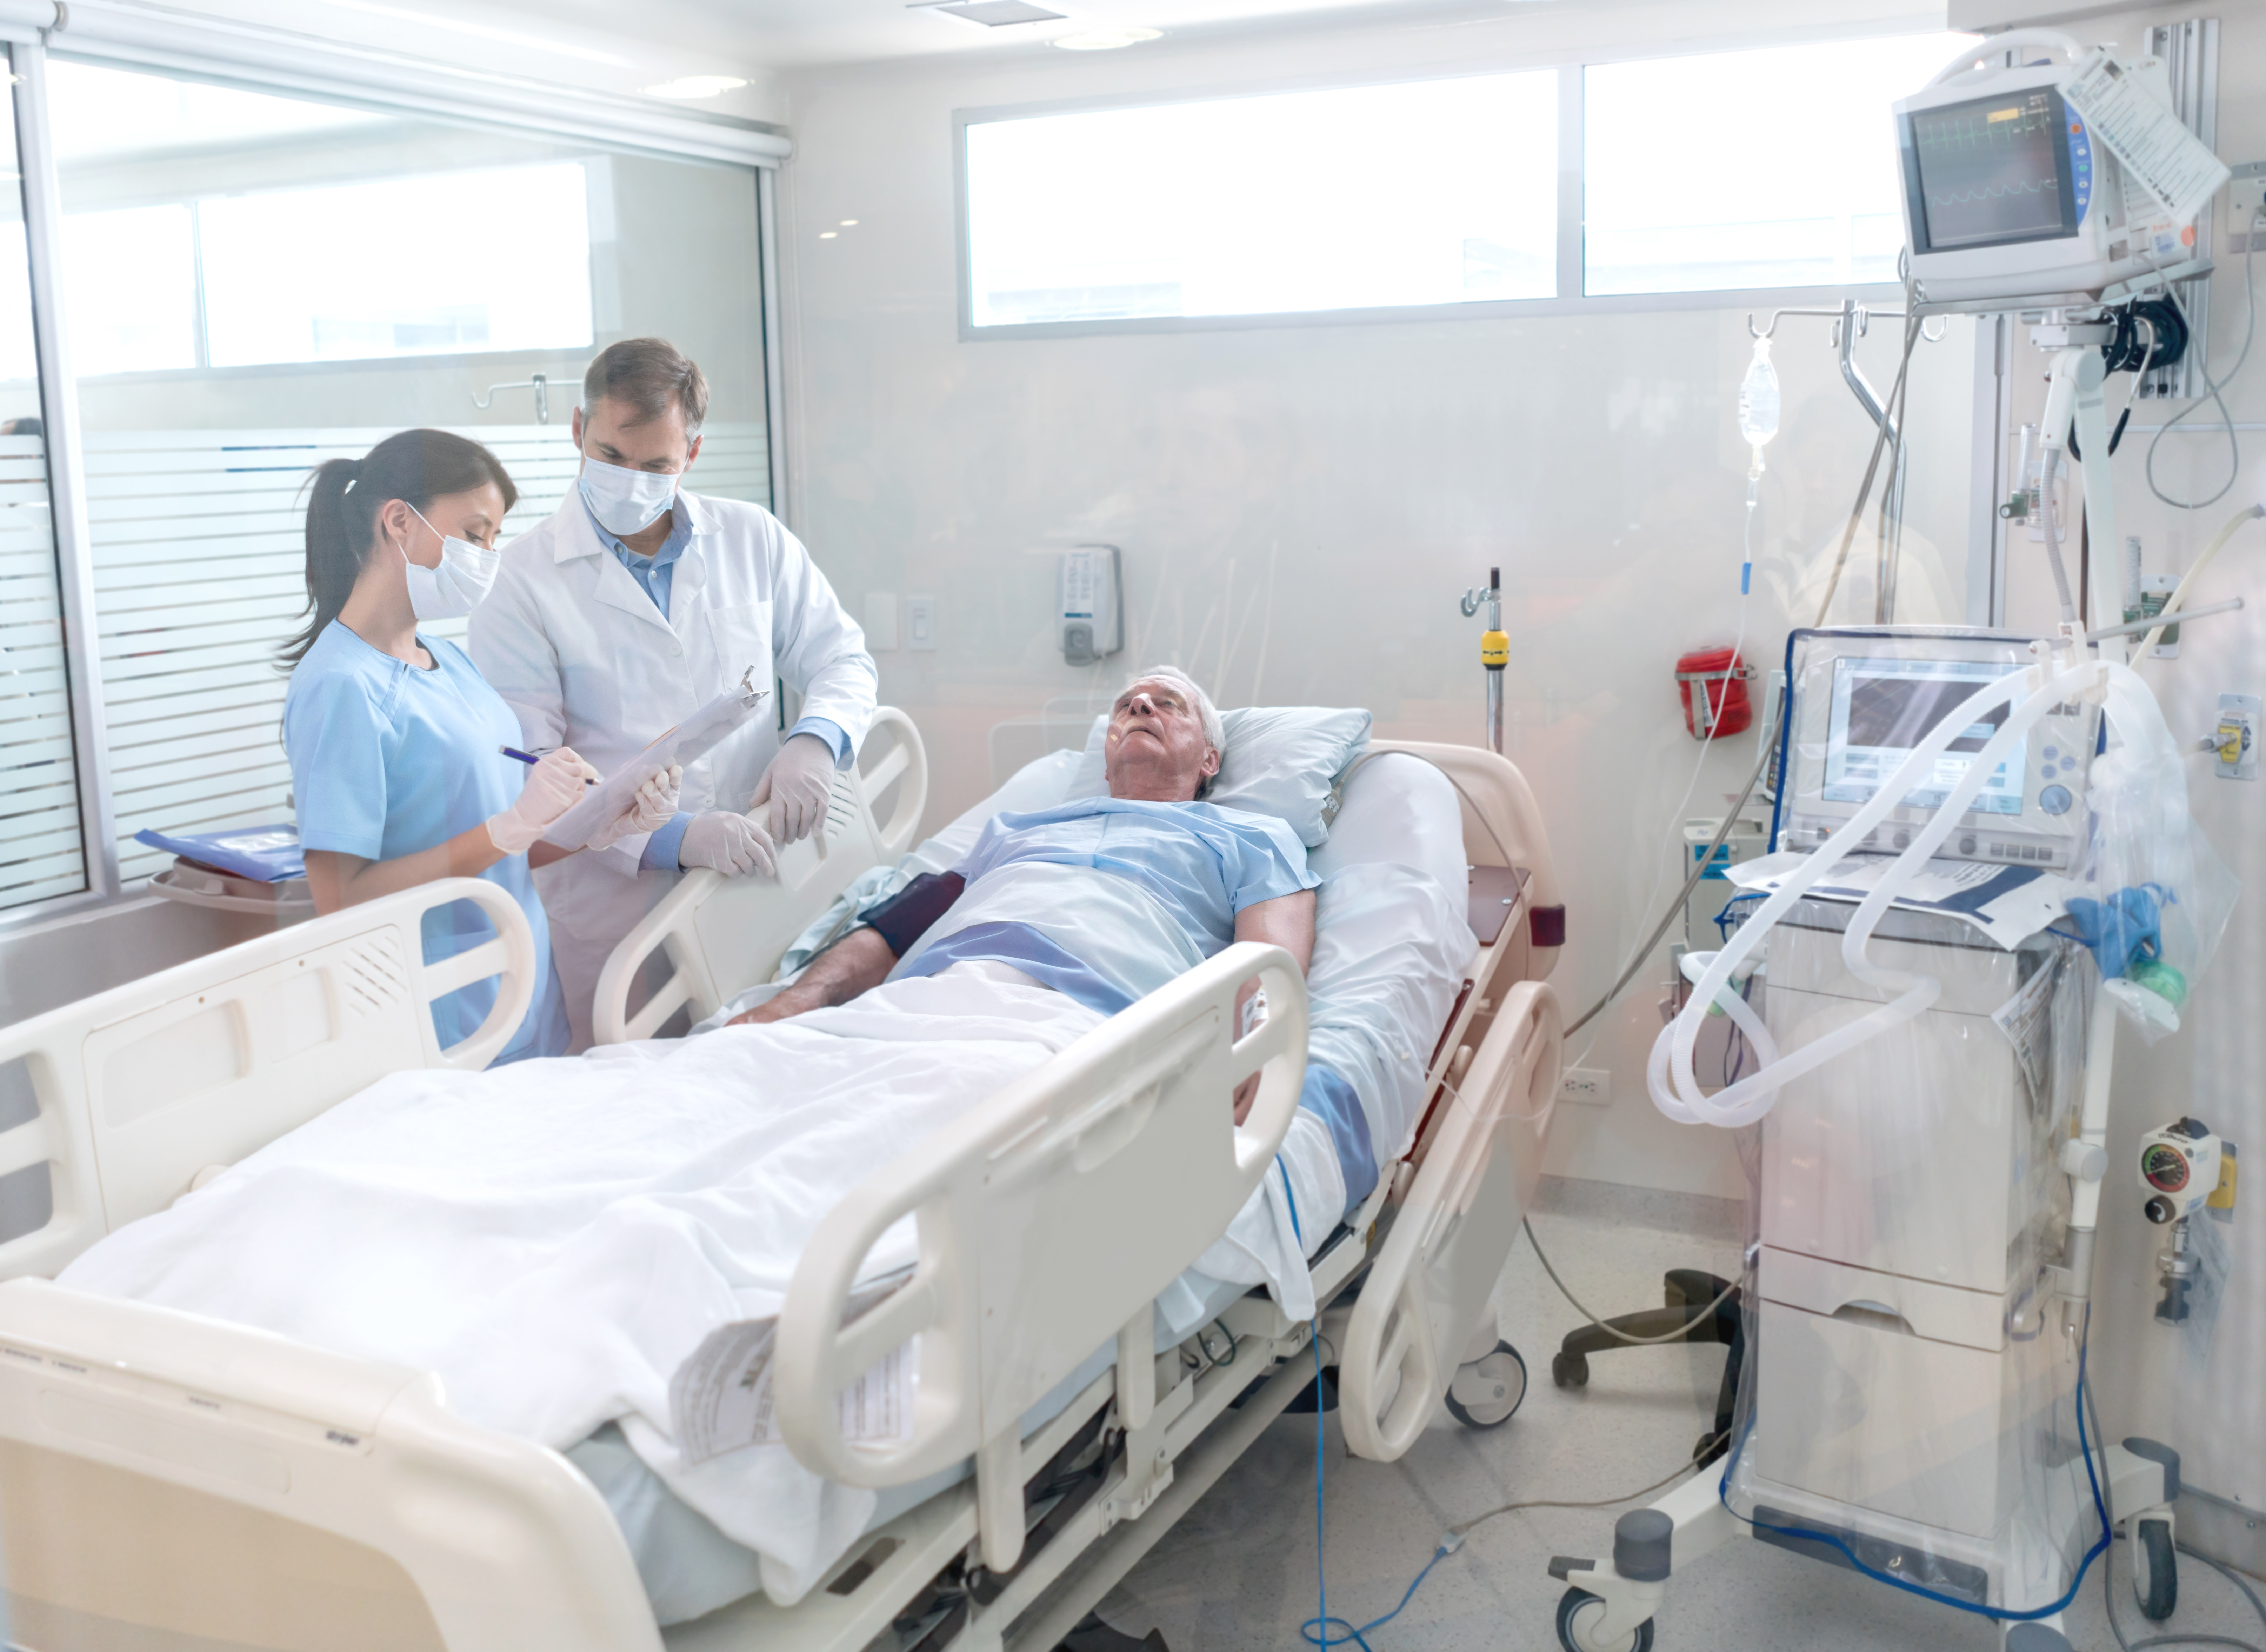 Doctors working at the hospital and checking on a senior patient at the Intensive Care Unit.